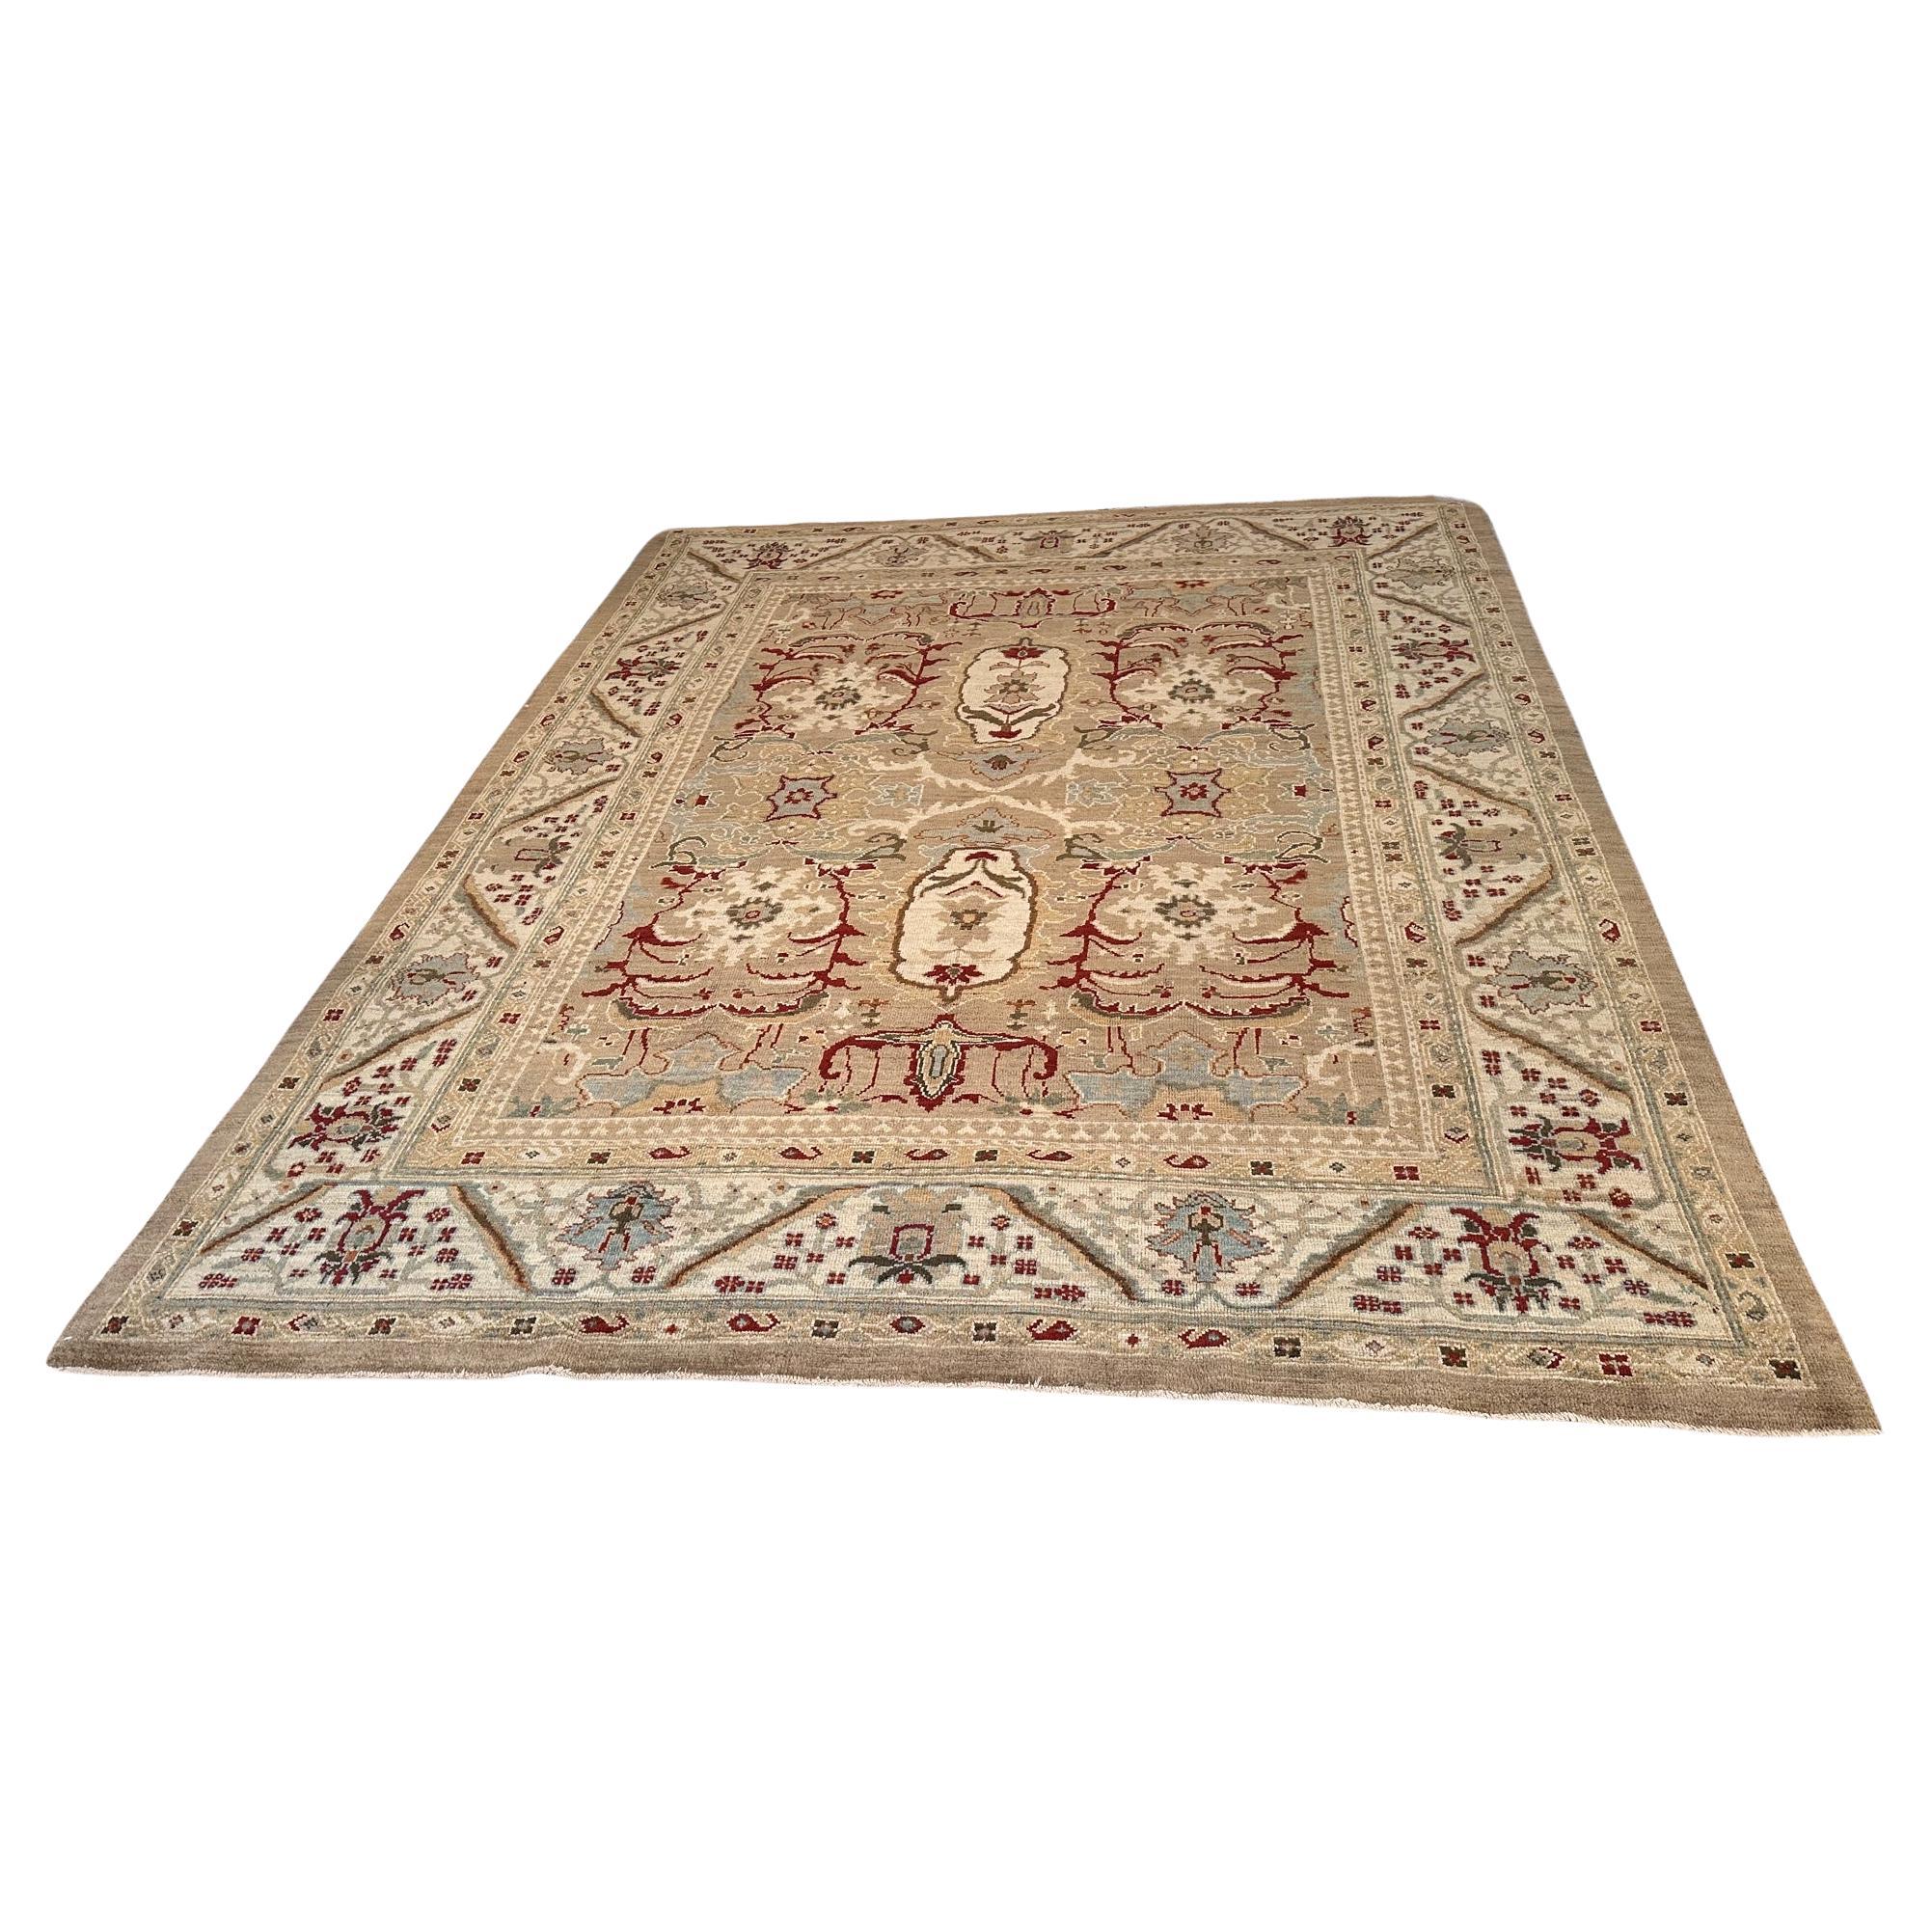 Neutral Sultanabad Wool Area Rug from Turkey